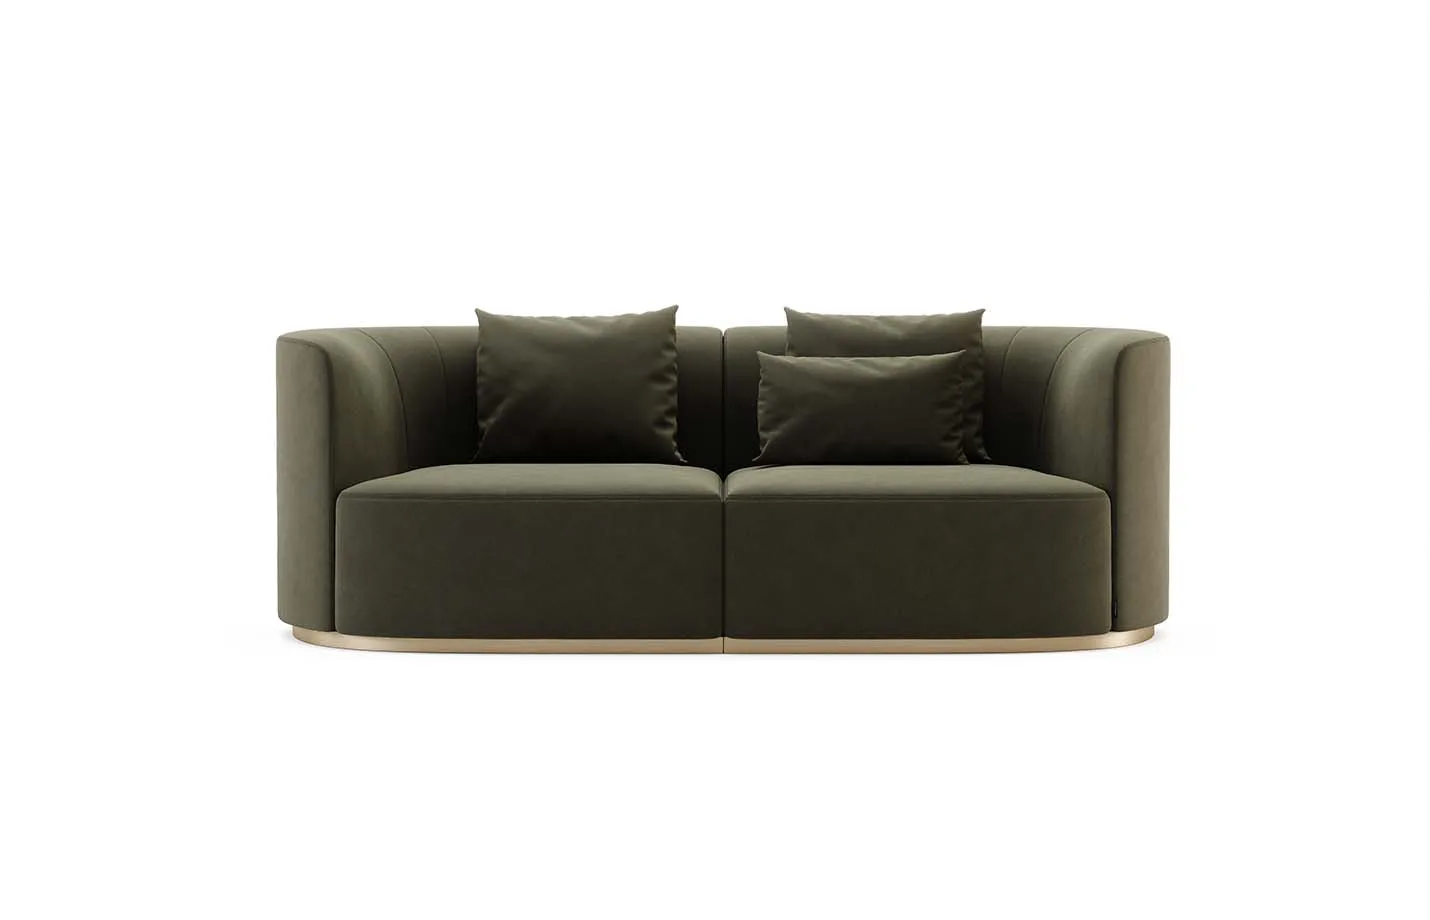 Chloe 2 Seater Sofa front view